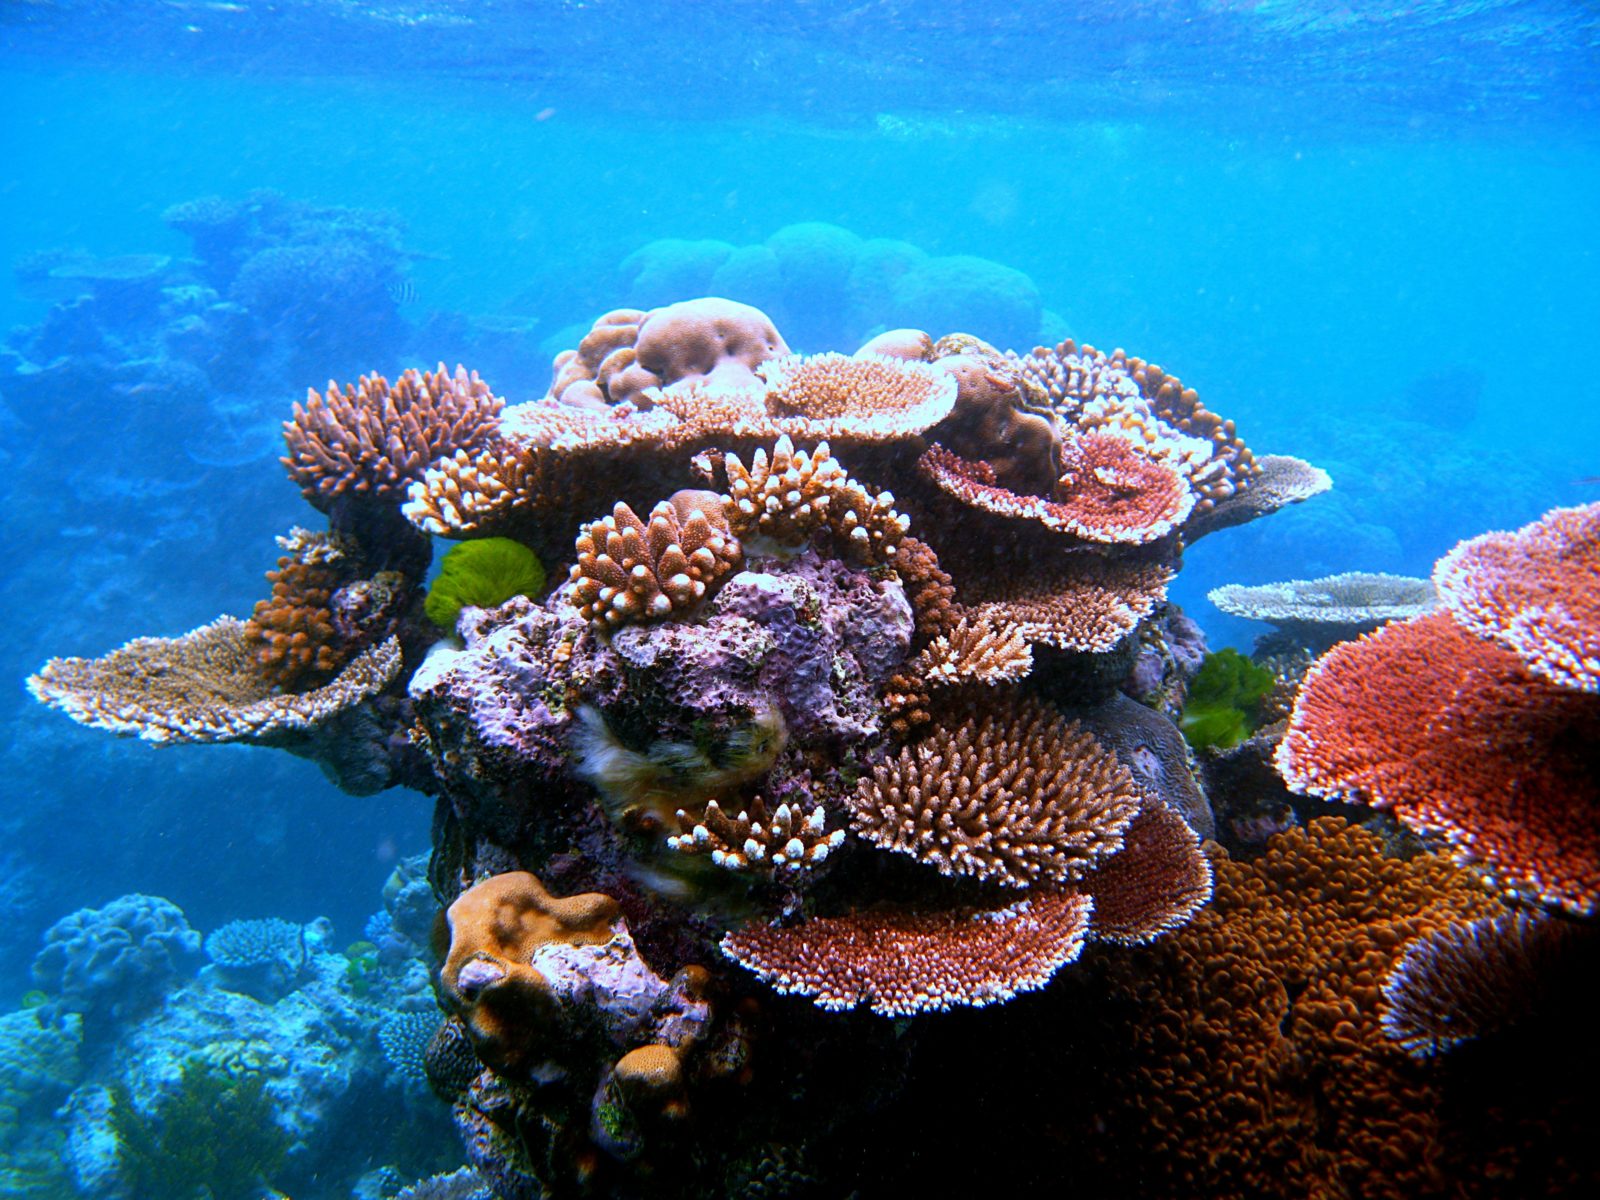 Coral outcrop on Flynn Reef By Toby Hudson - CC BY-SA 3.0